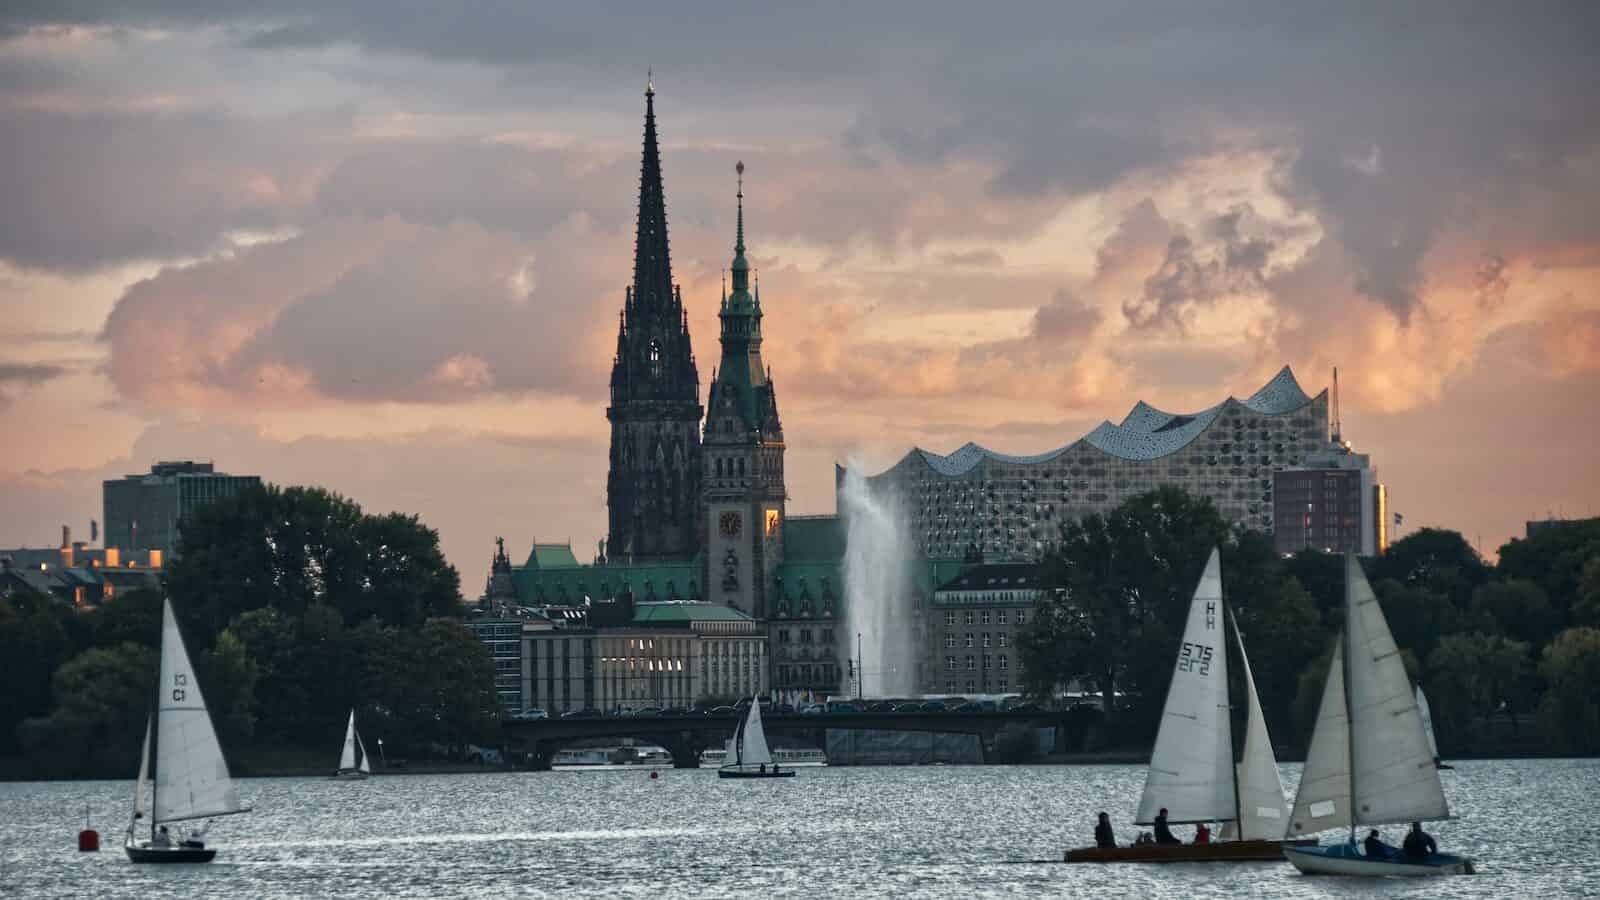 German City on a river during dusk with sailboats and kayaks on the water